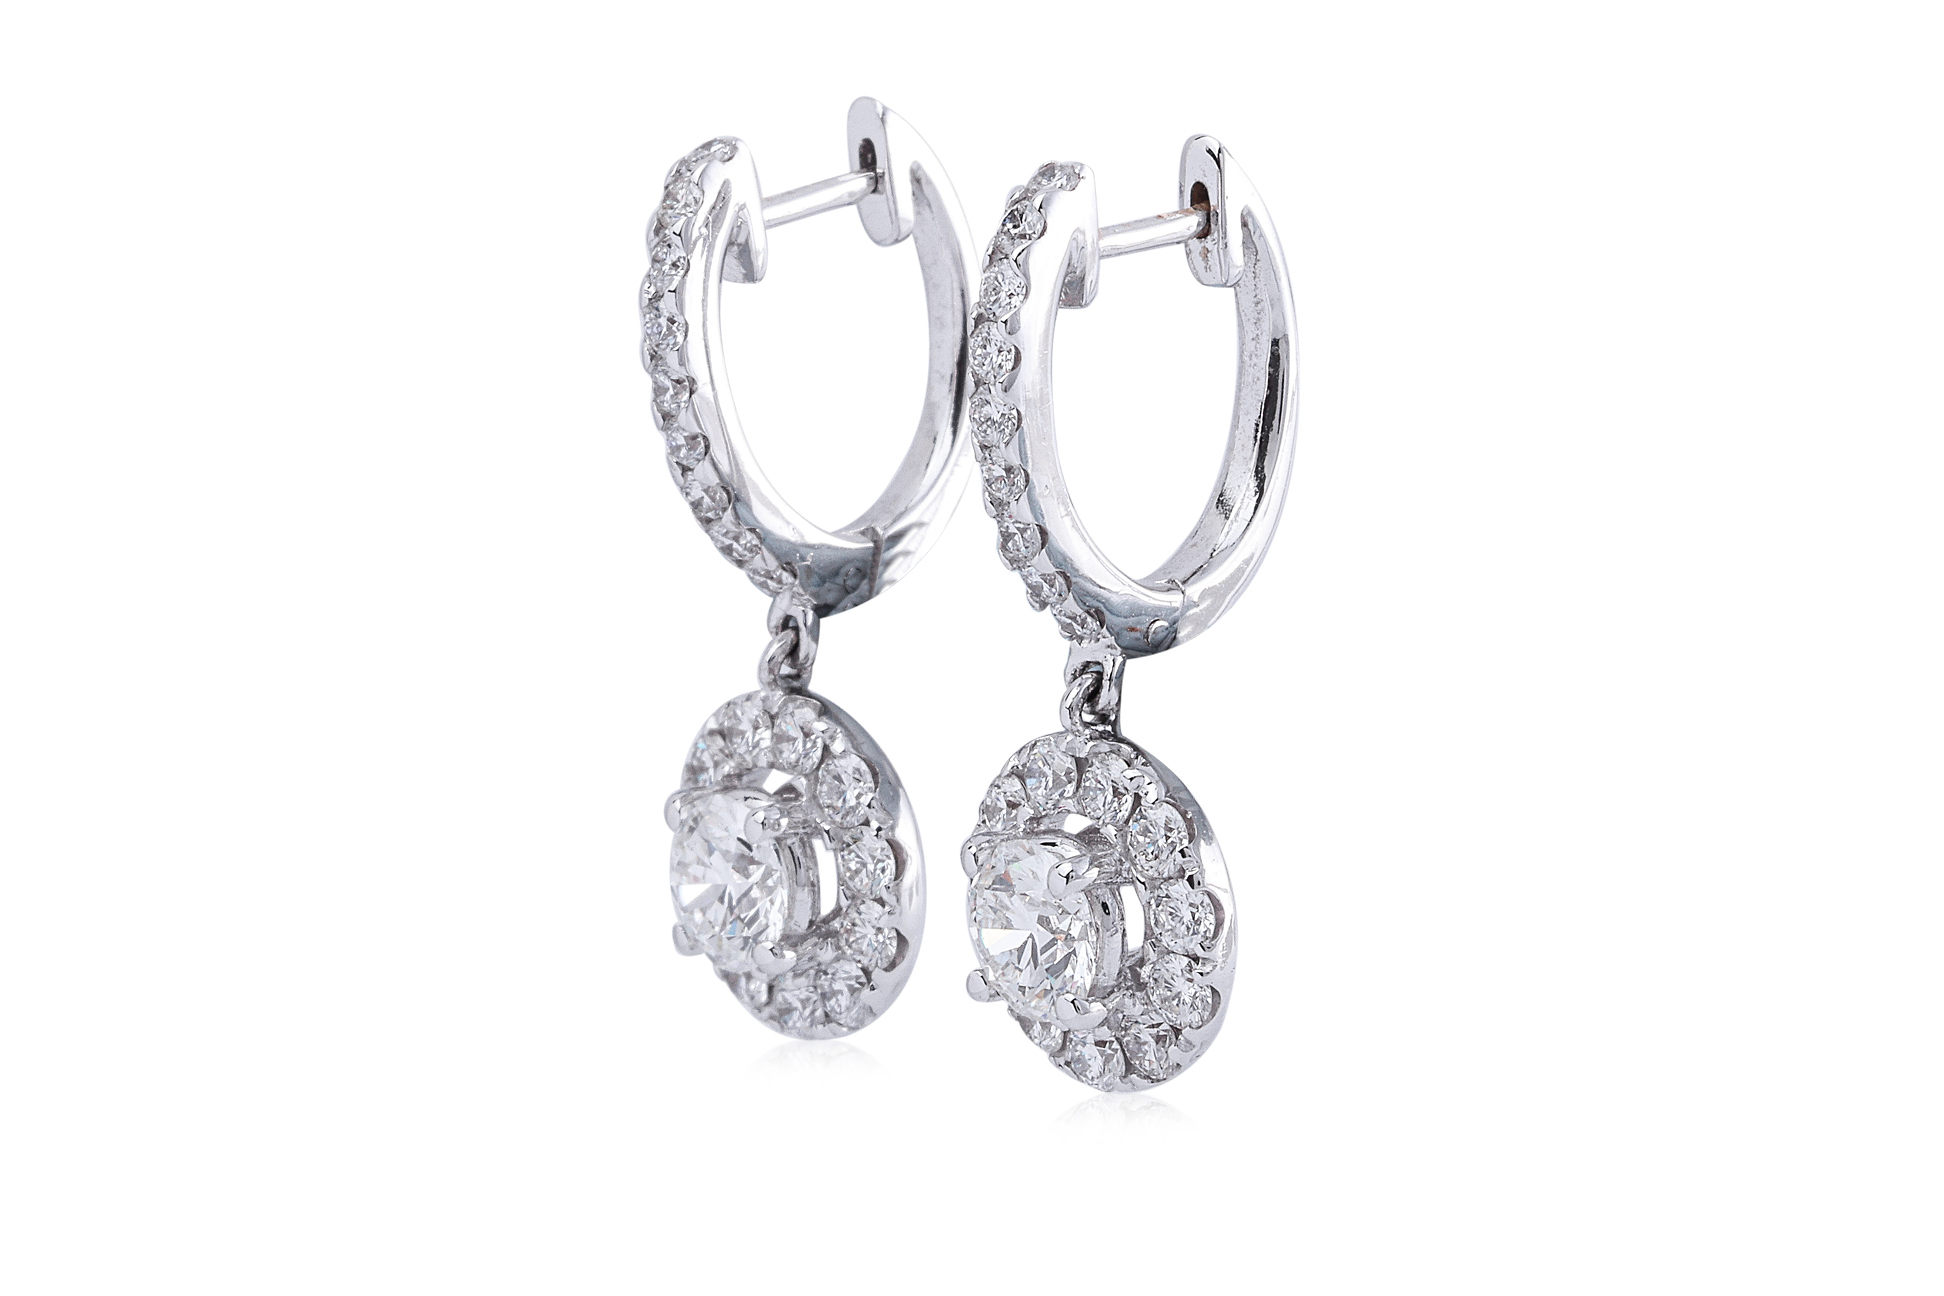 A PAIR OF DIAMOND 'HALO' EARRINGS BY LARRY JEWELLERY - Image 2 of 4